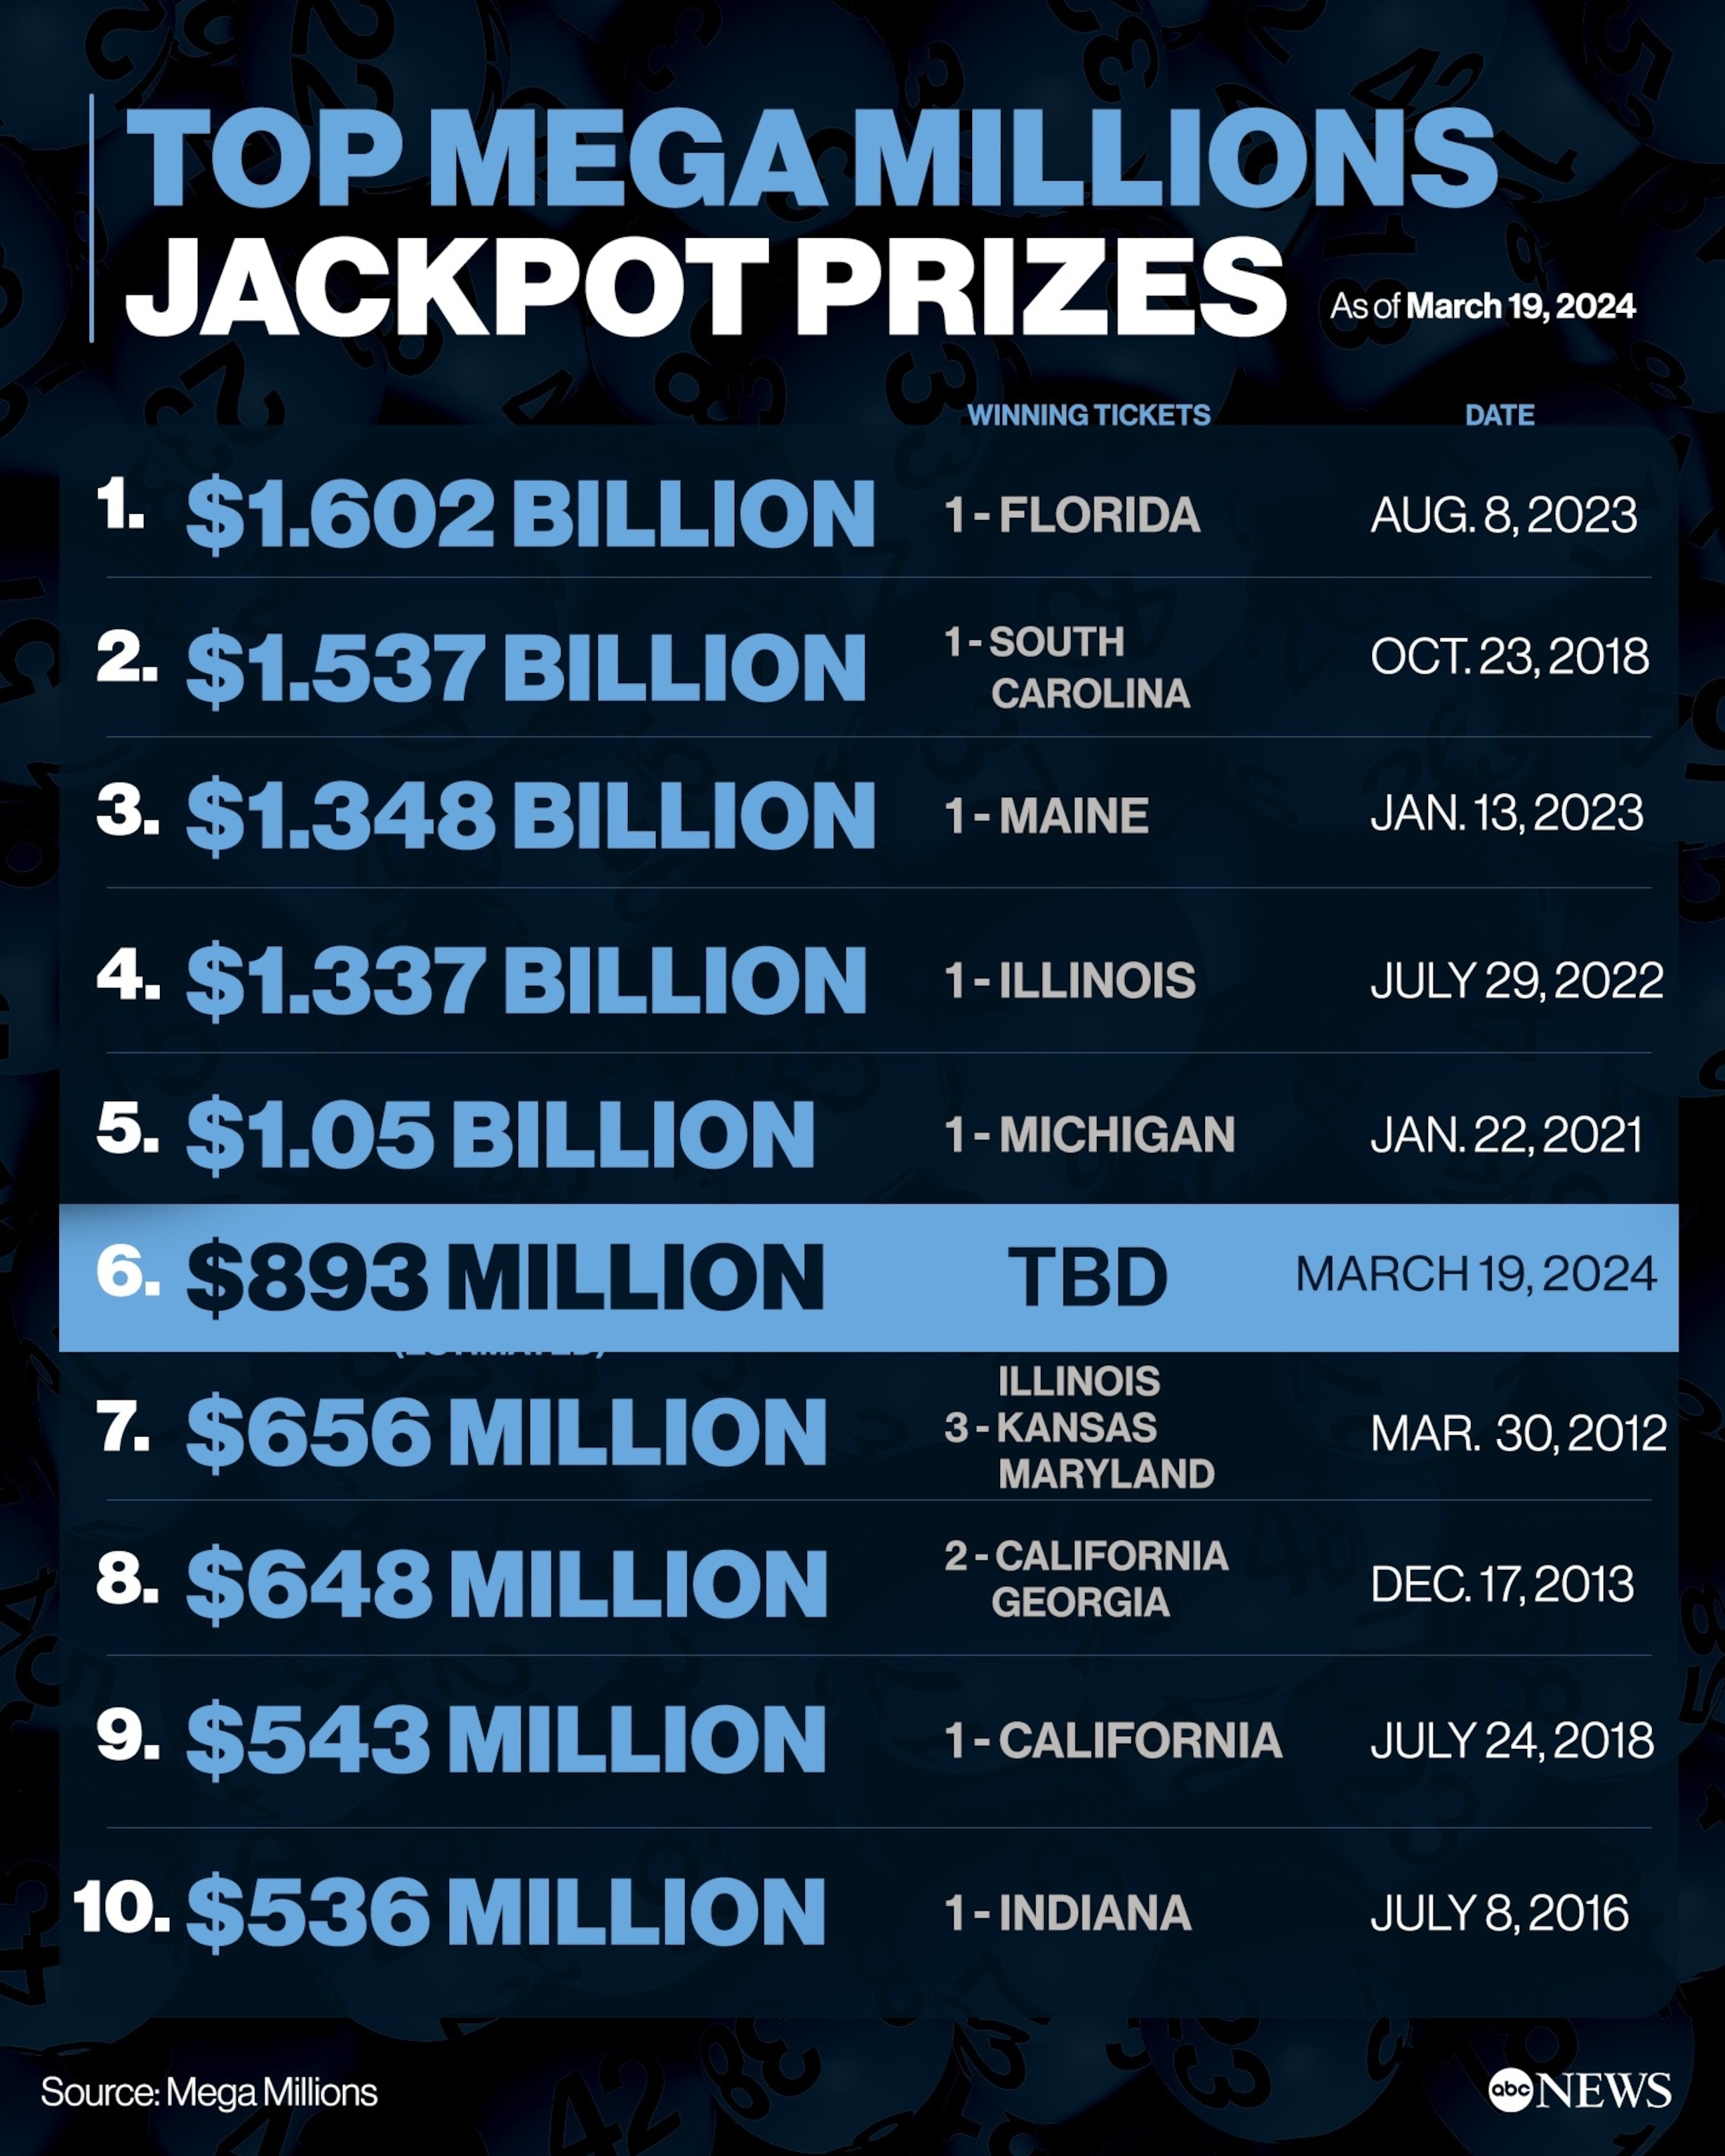 The 10 largest jackpot prizes in Mega Millions’ game history